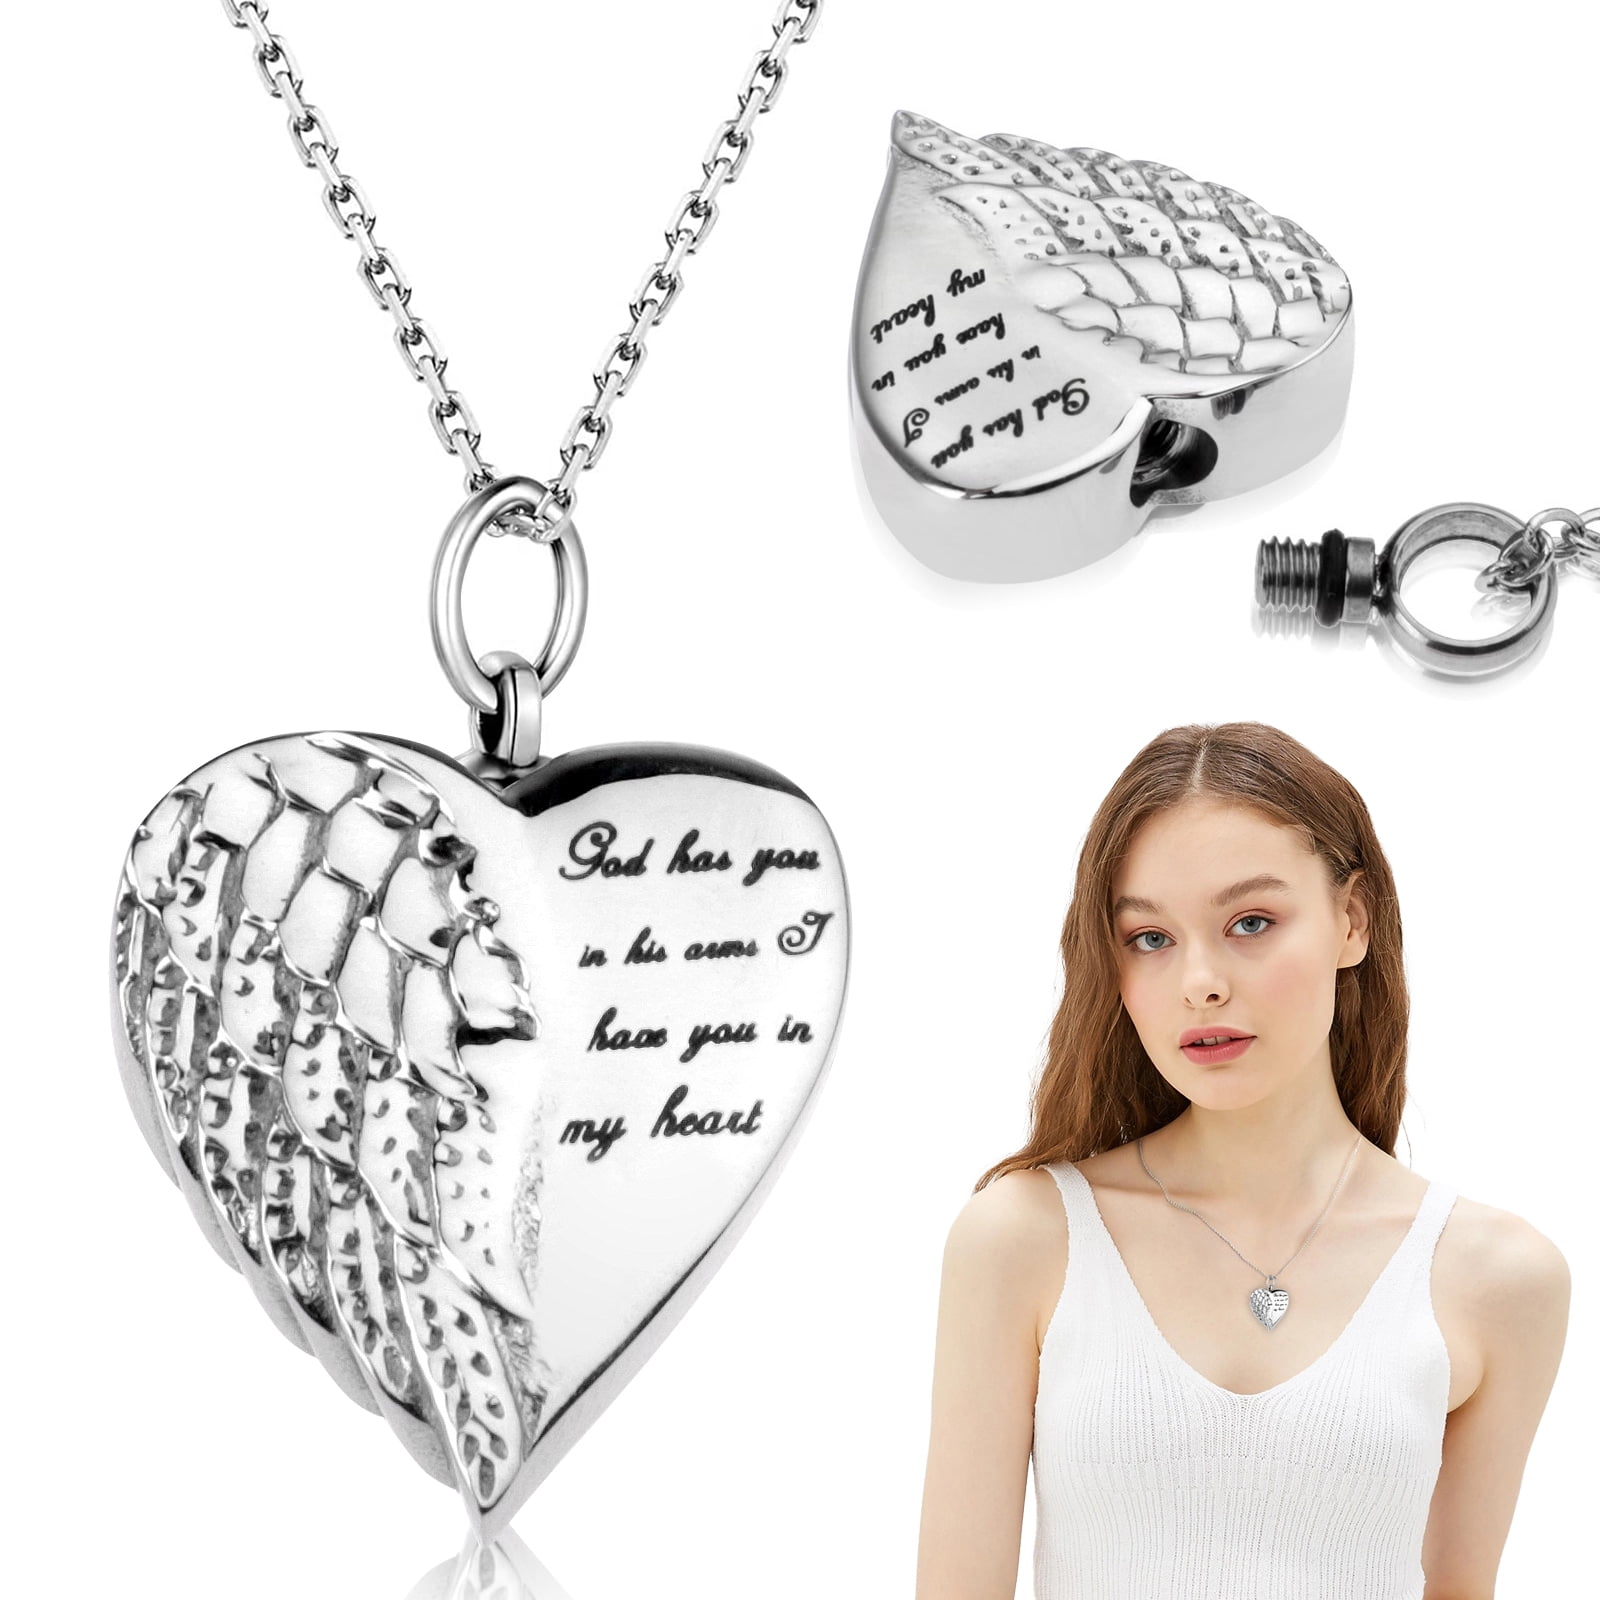 Heart Urn Necklaces Cremation Necklace Stainless Steel Necklace Ashes Jewelry Keepsake Memorial Ashes Holders Mom Dad Pet Silver fd66f1d3 6928 4b27 b235 cd559b43b122.d3e1c57b4022c7fe6a4578841bf6bdc3